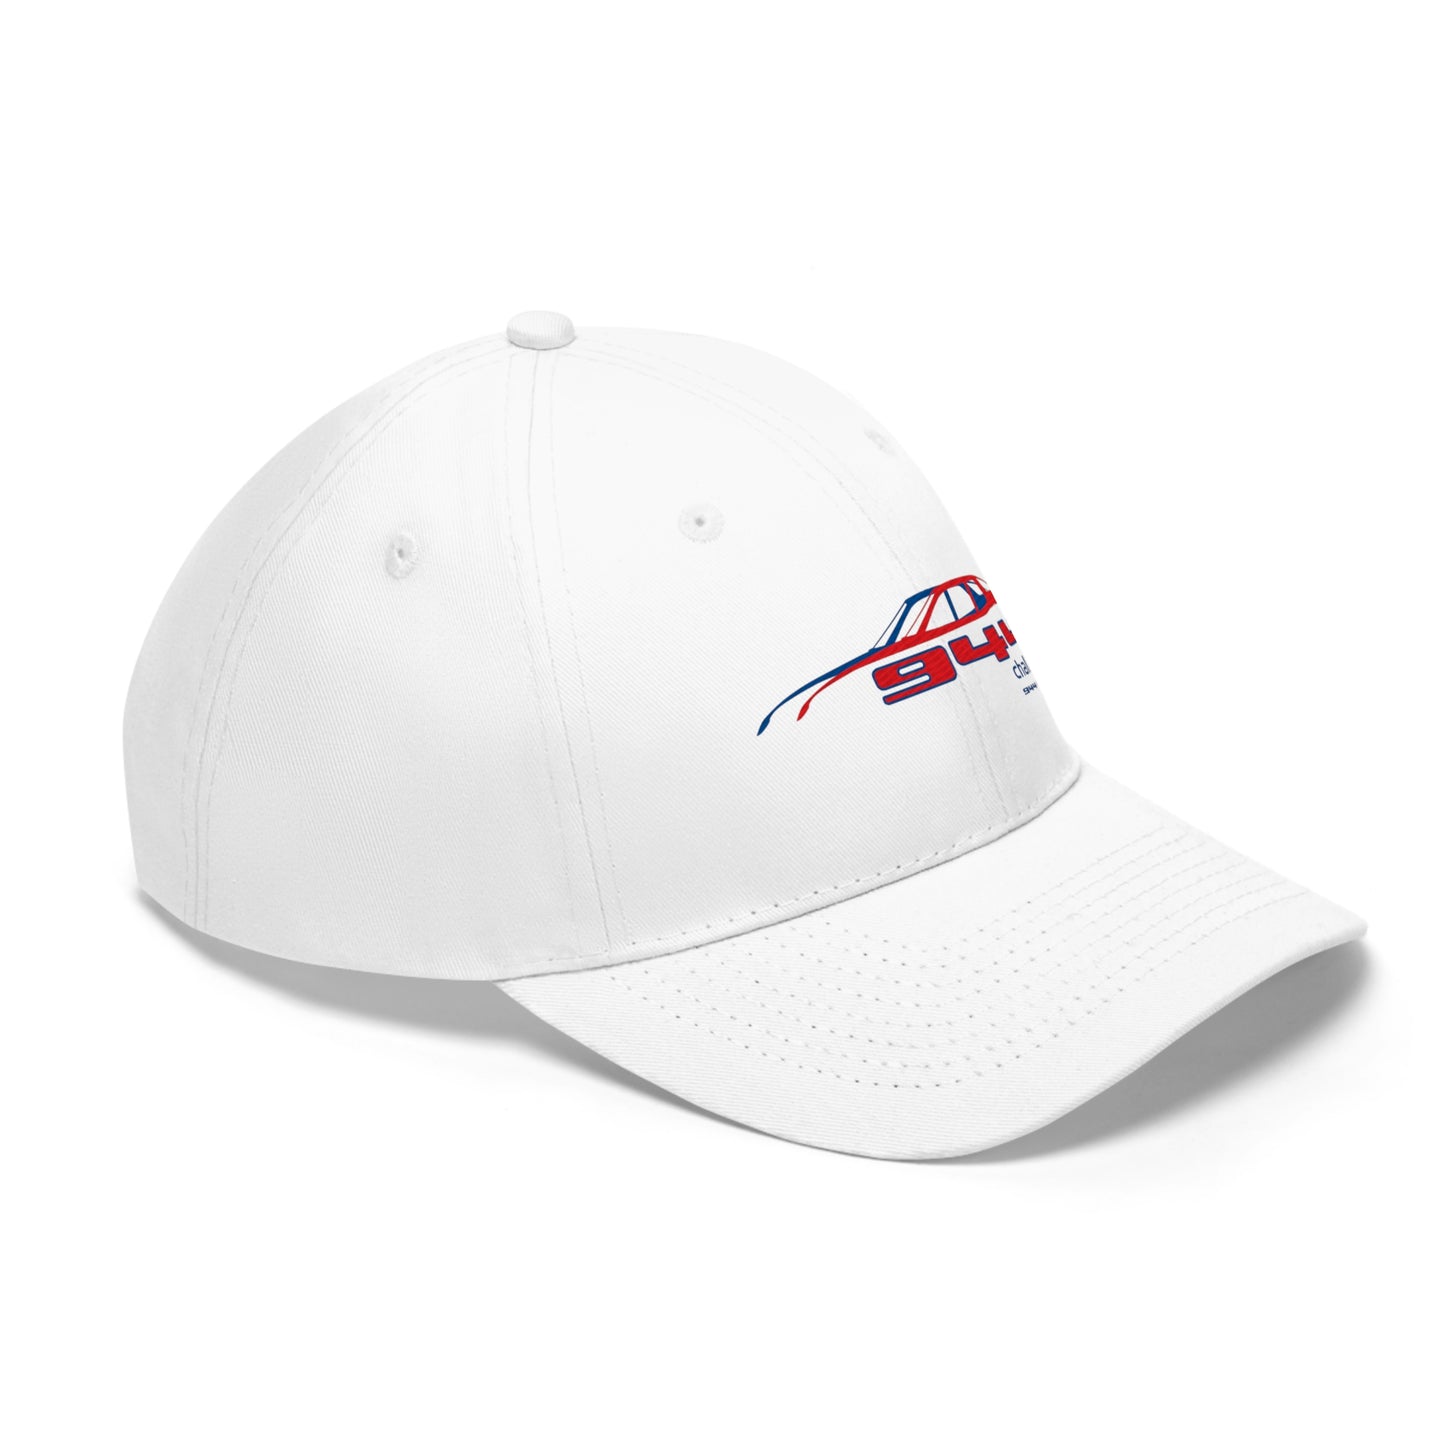 944 CHALLENGE Embroidered cap - circuit white